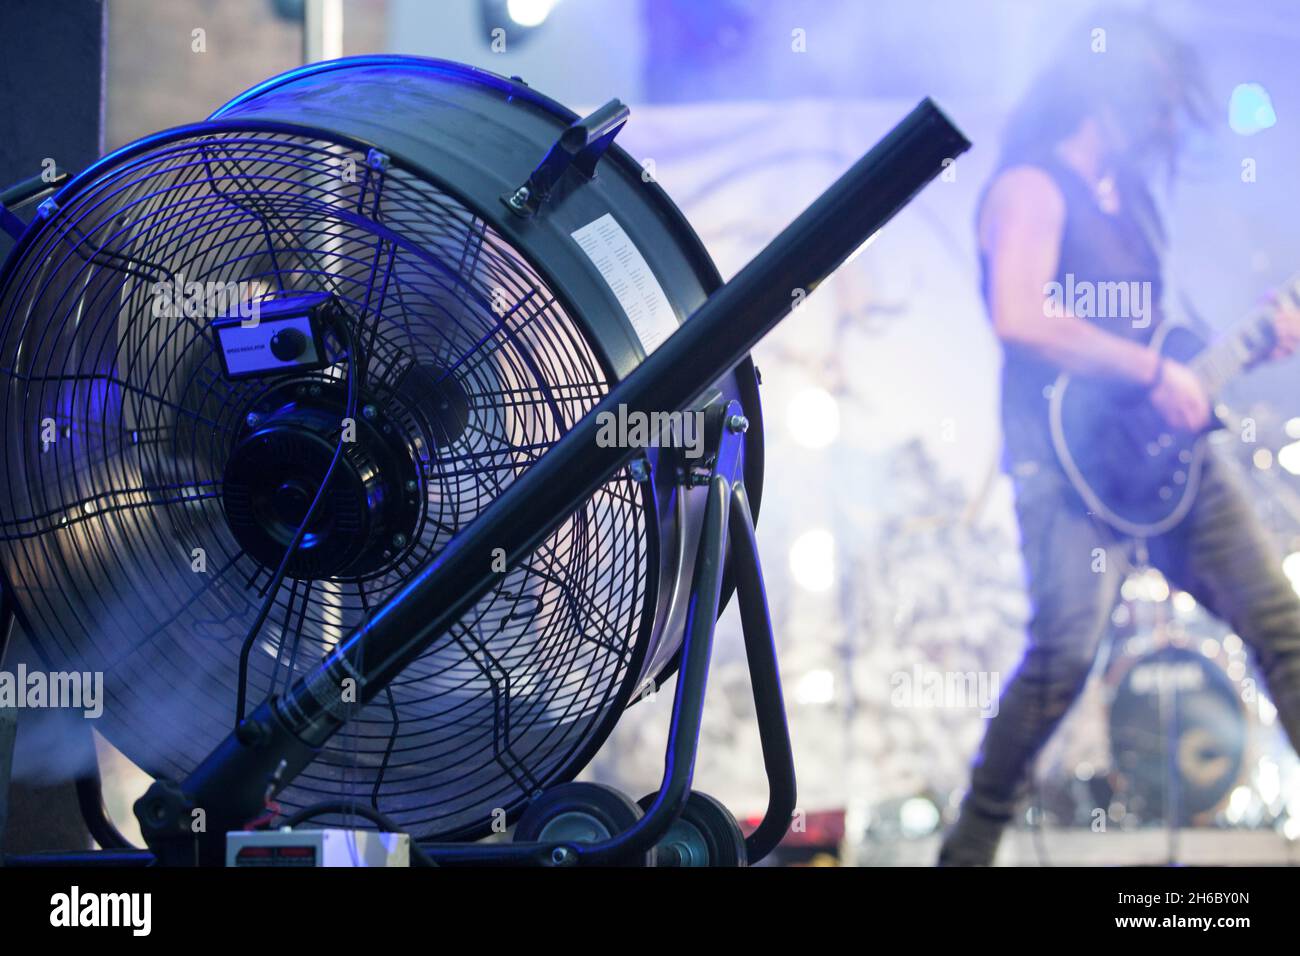 Stage blower used with haze machine during live rock performance. Musicians on background Stock Photo